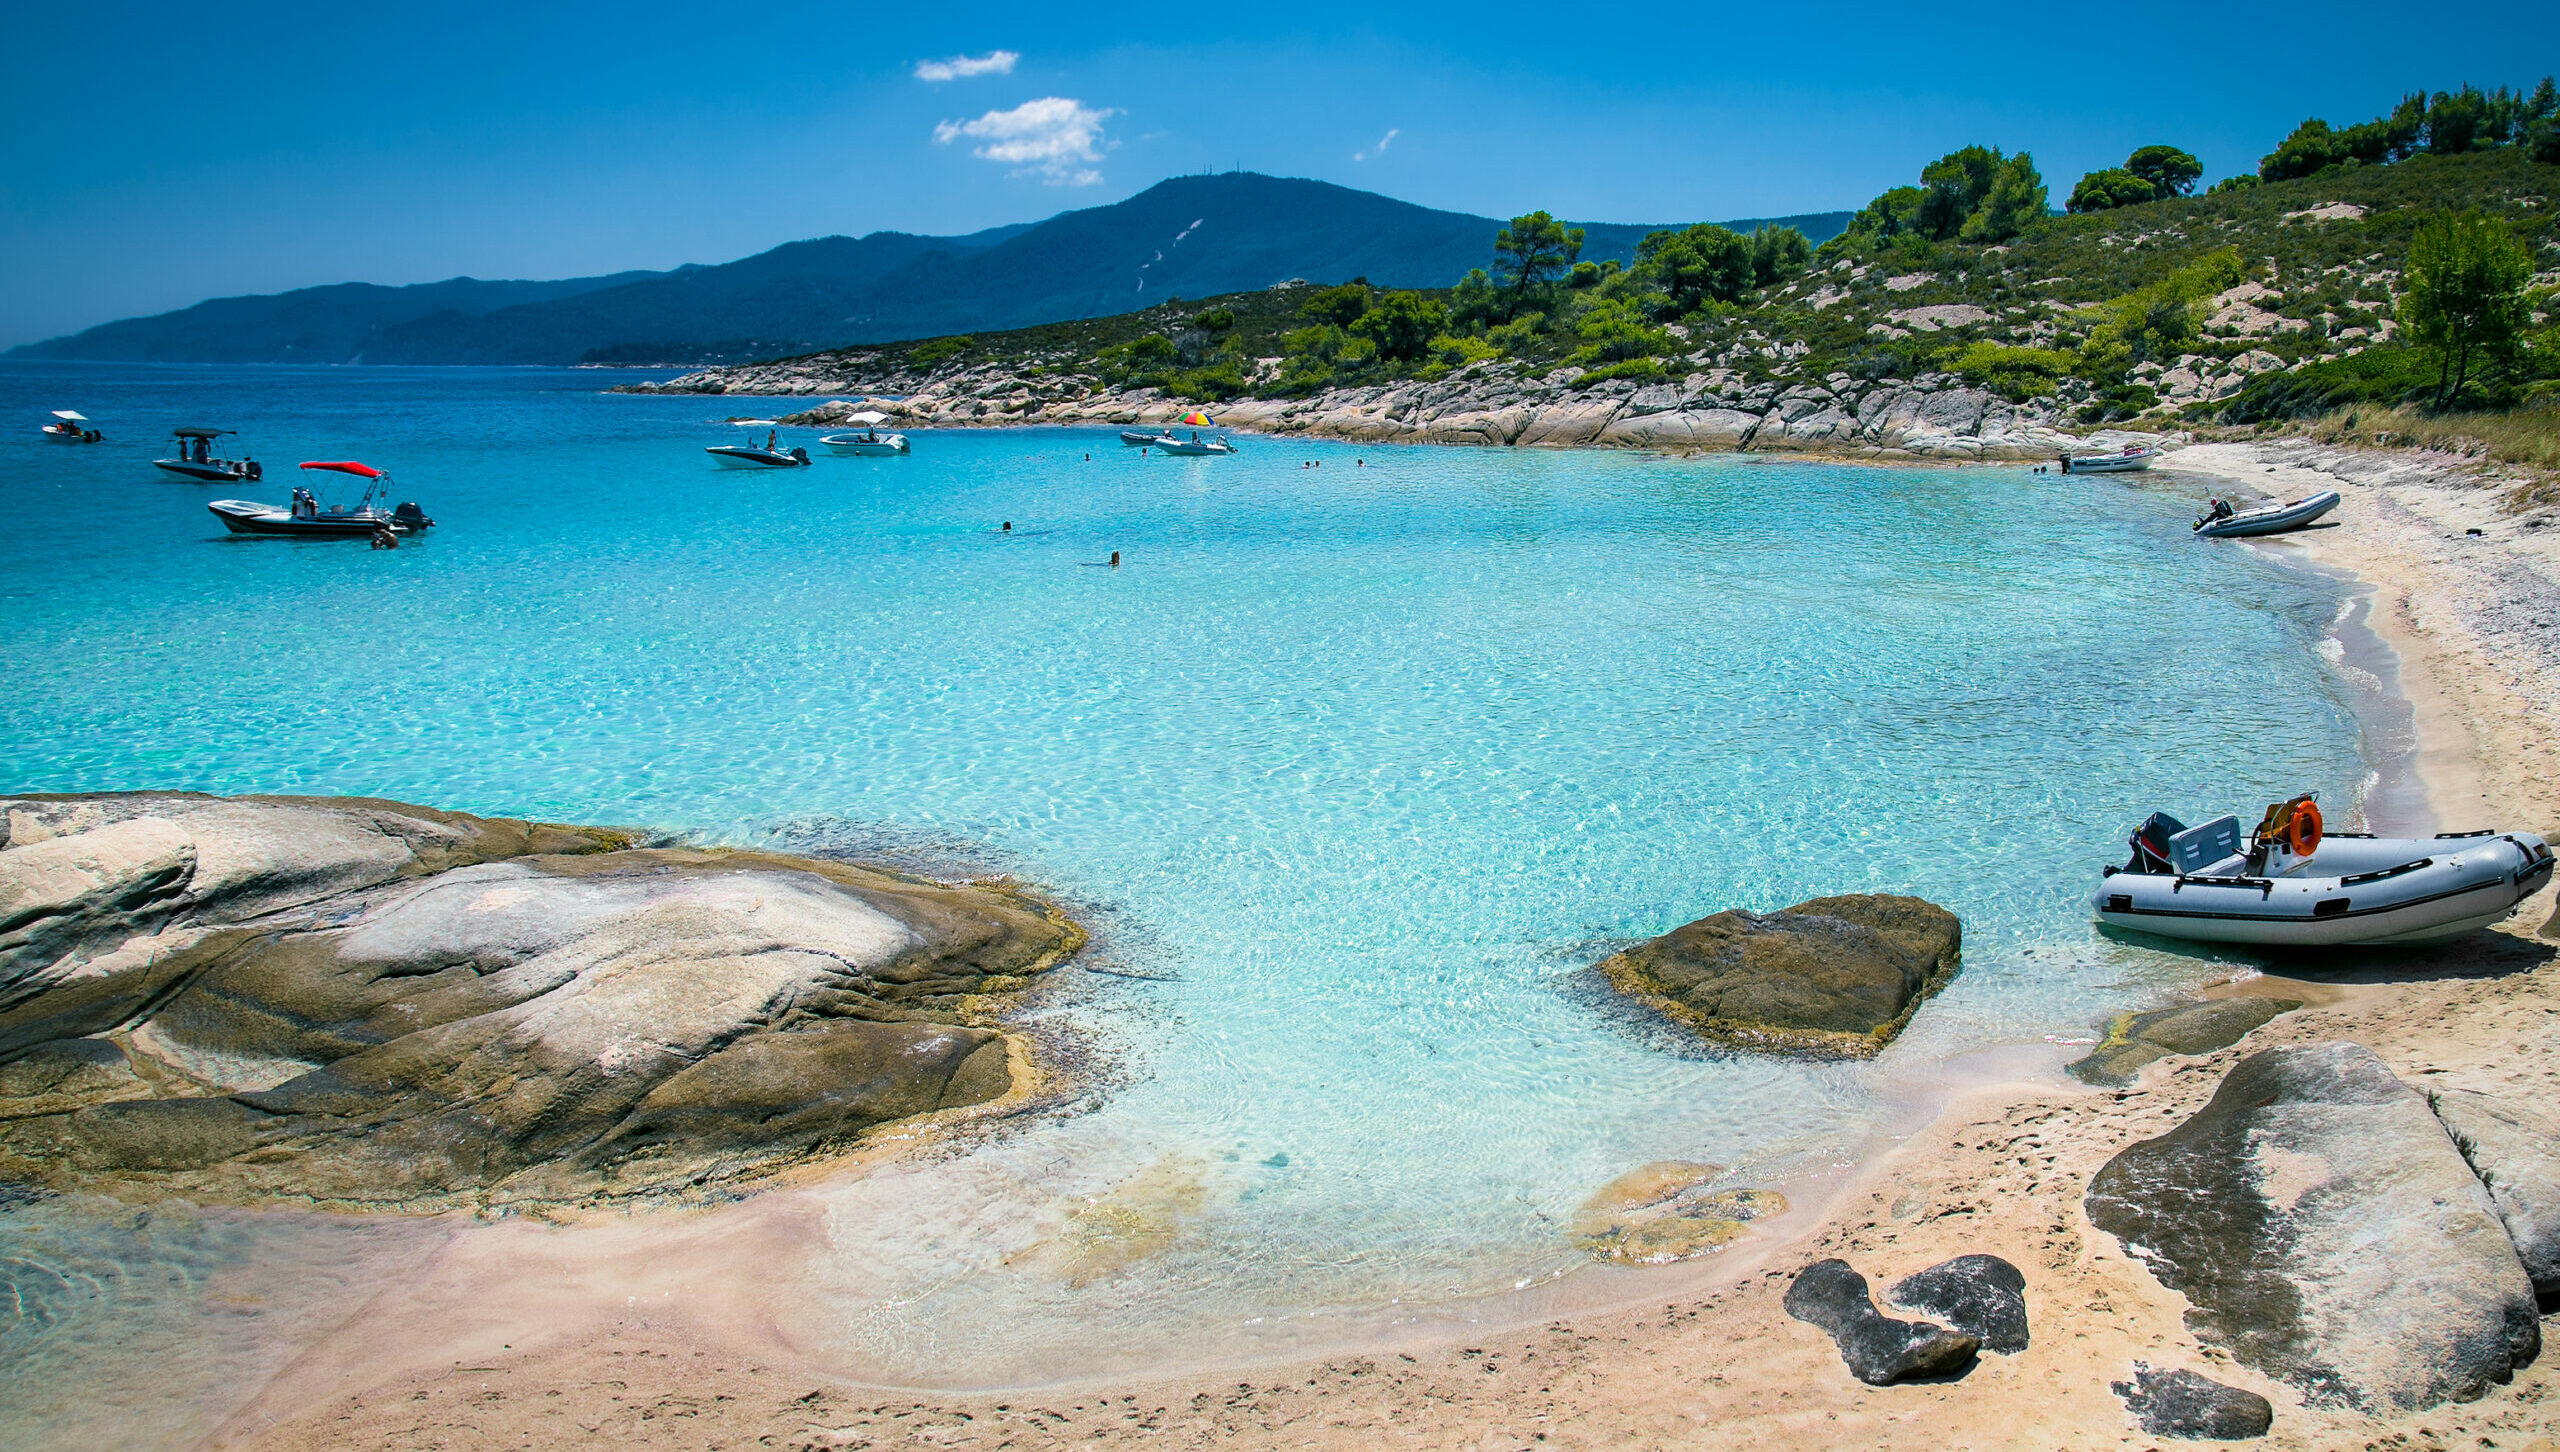 Halkidiki: Diaporos, the Greek island that it has warm waters all the year-round